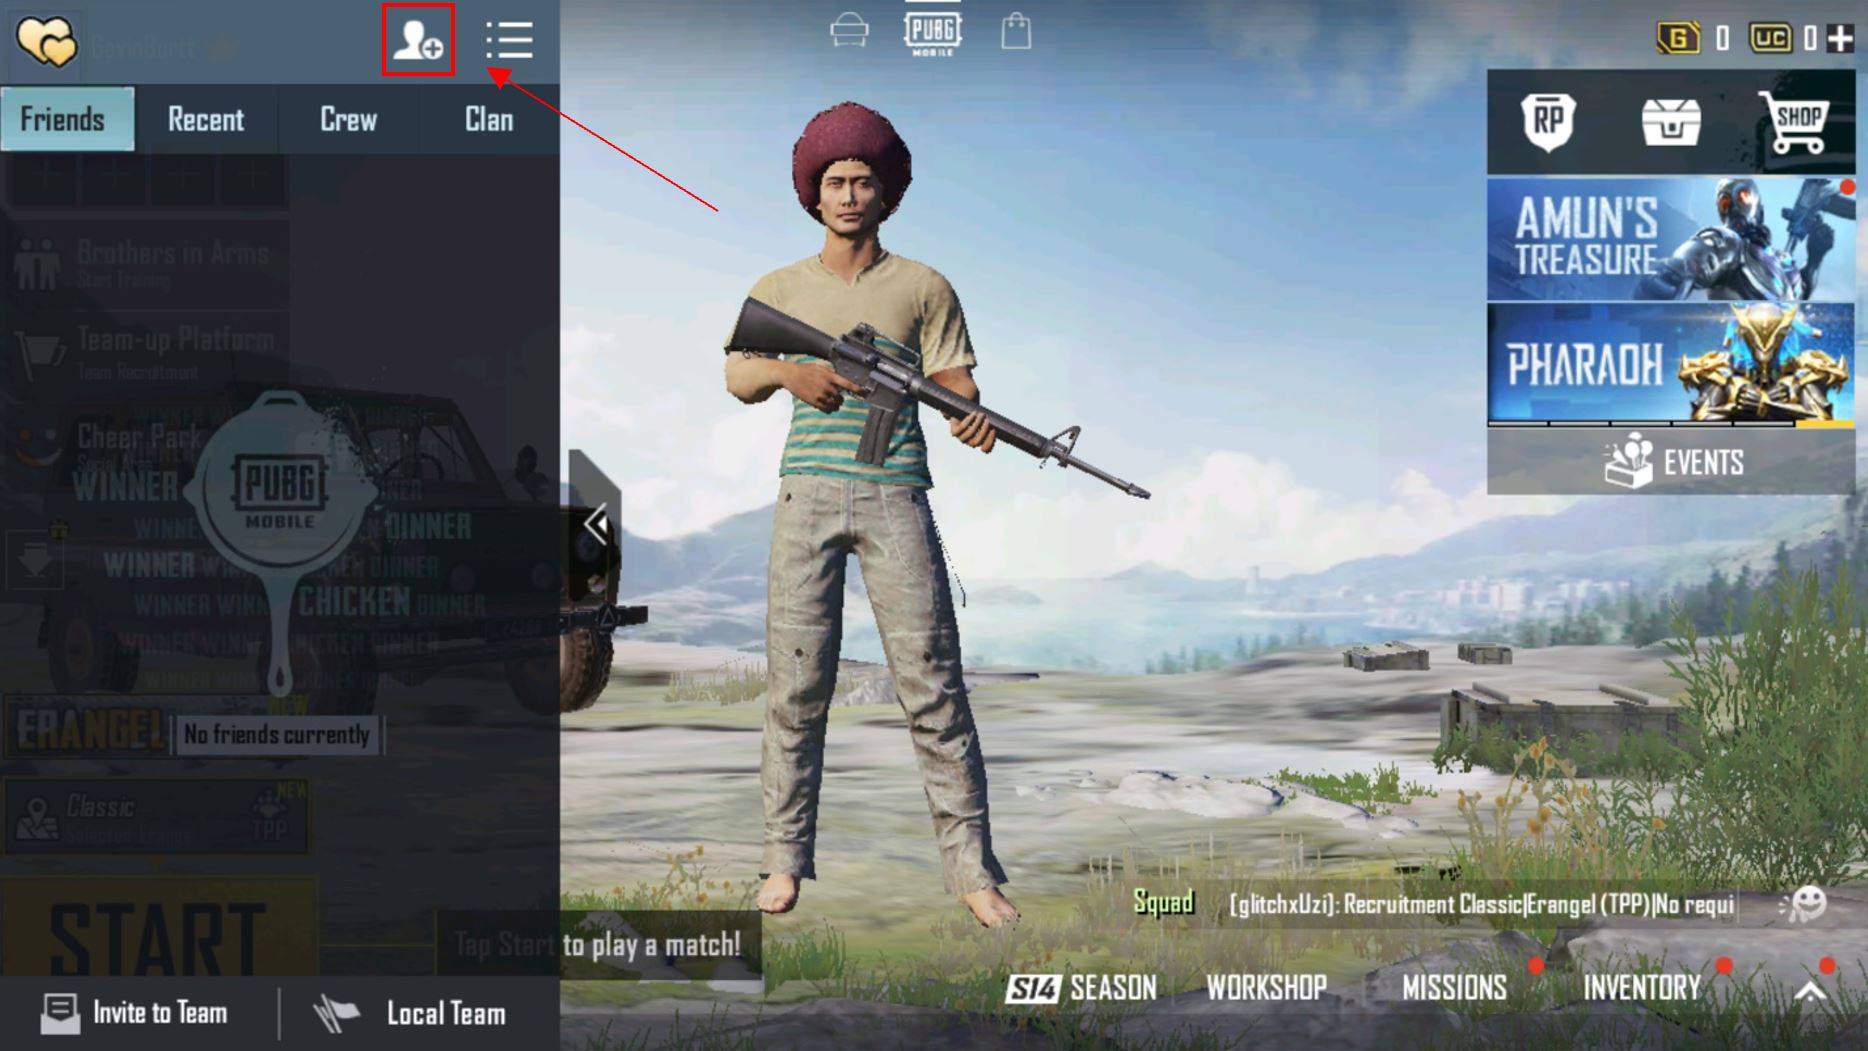 How To Add Friends In Pubg Mobile